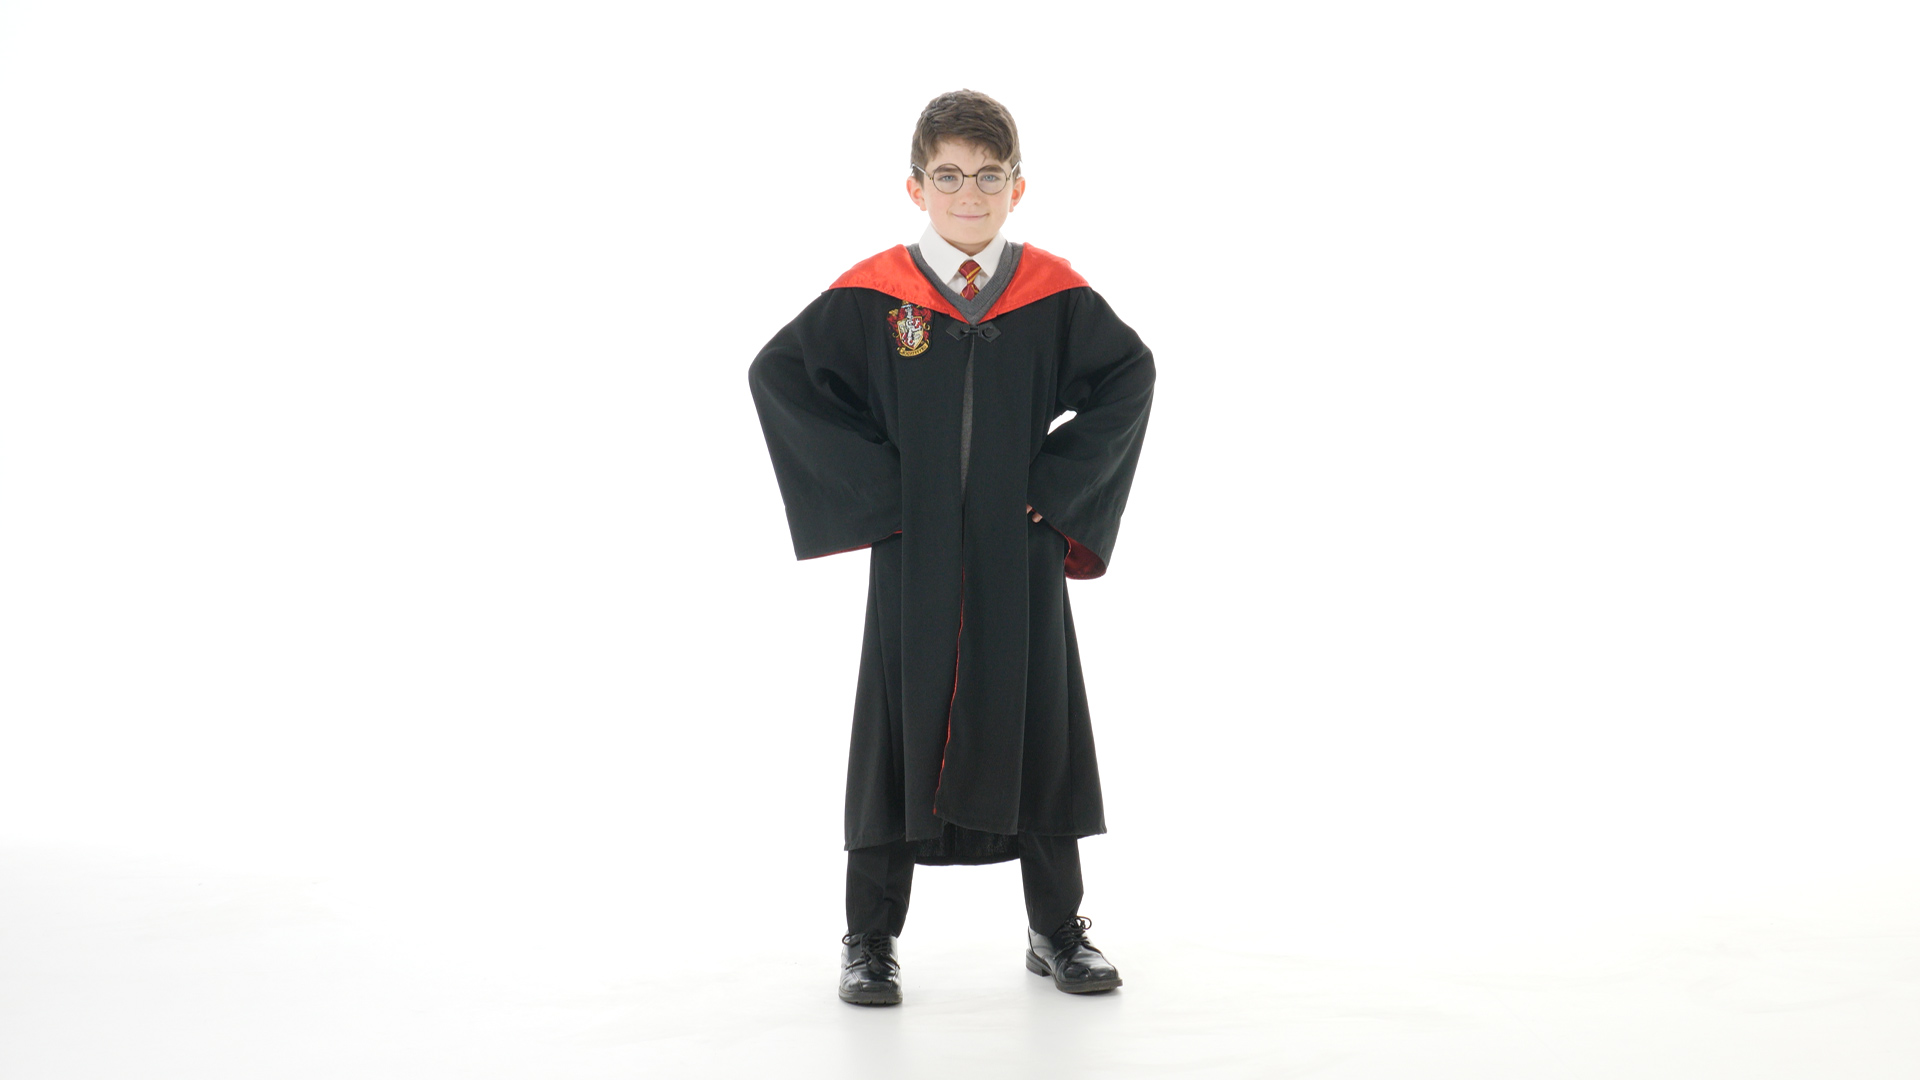 Become the wizard of wizards and learn to wield the mystery of magic in this Kid's Deluxe Harry Potter Costume! Save the day from you-know-who with the Deluxe Harry Potter Kid's Costume!